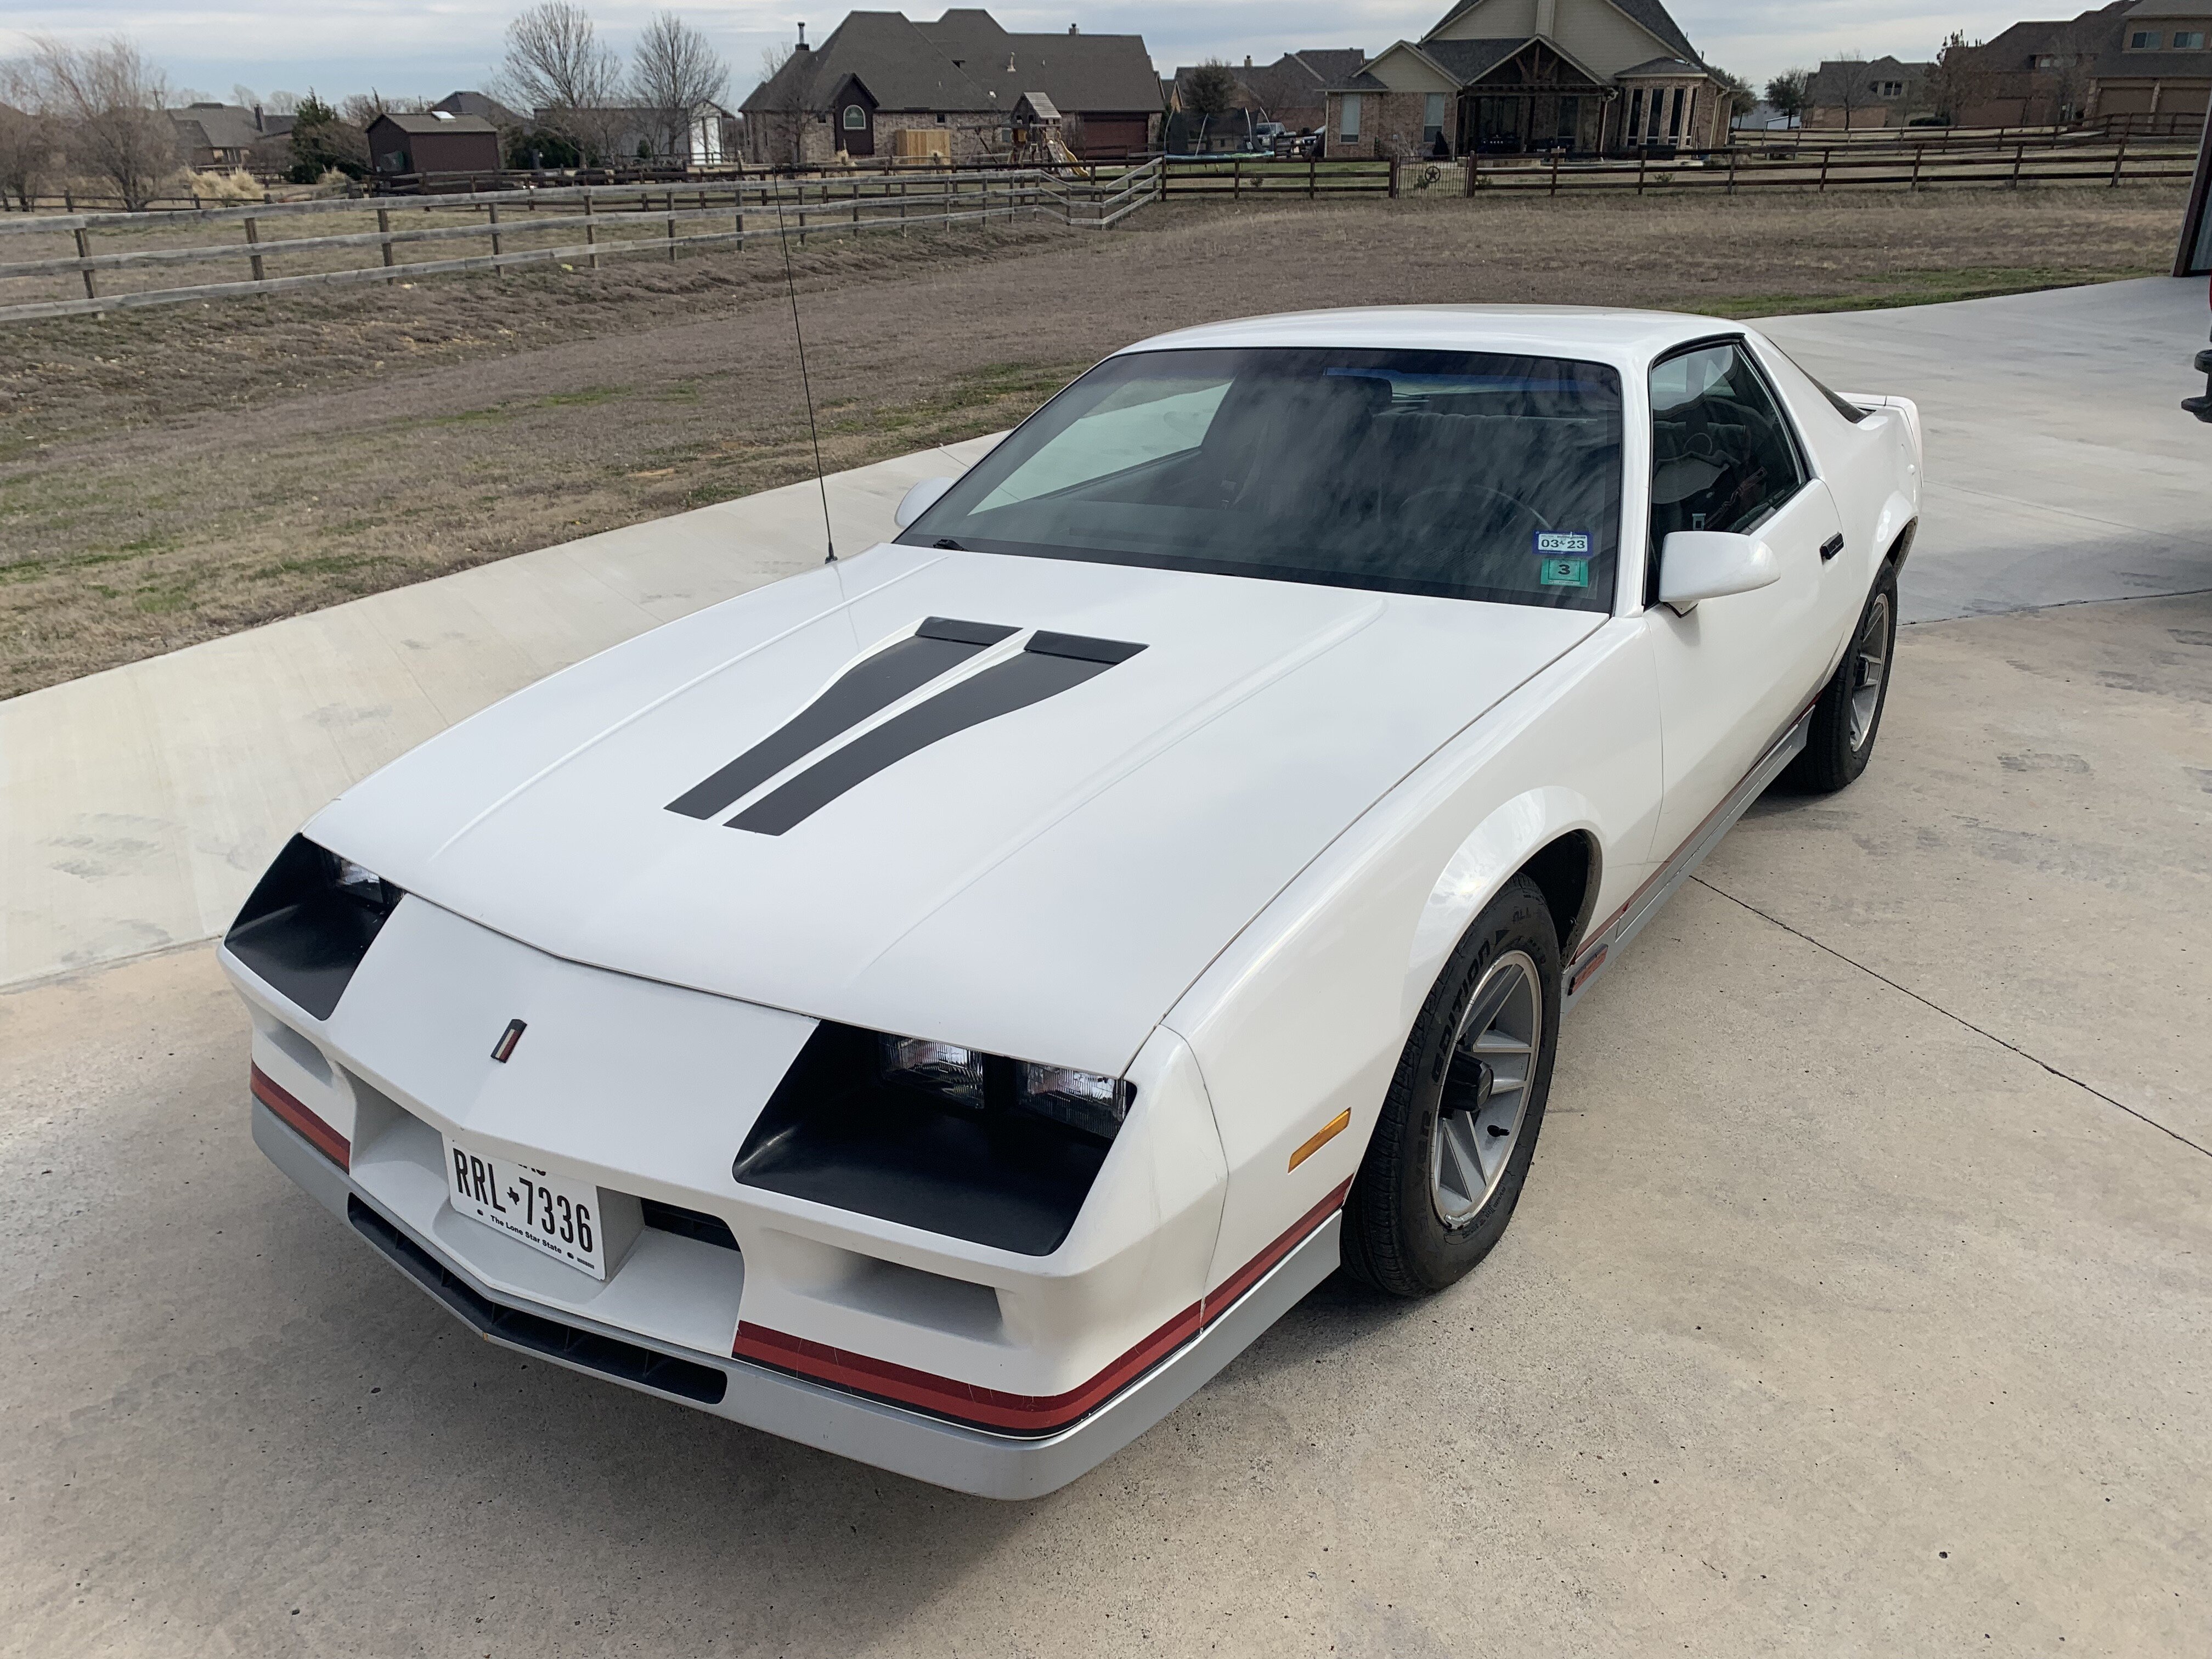 1982 Chevrolet Camaro Classic Cars for Sale - Classics on Autotrader